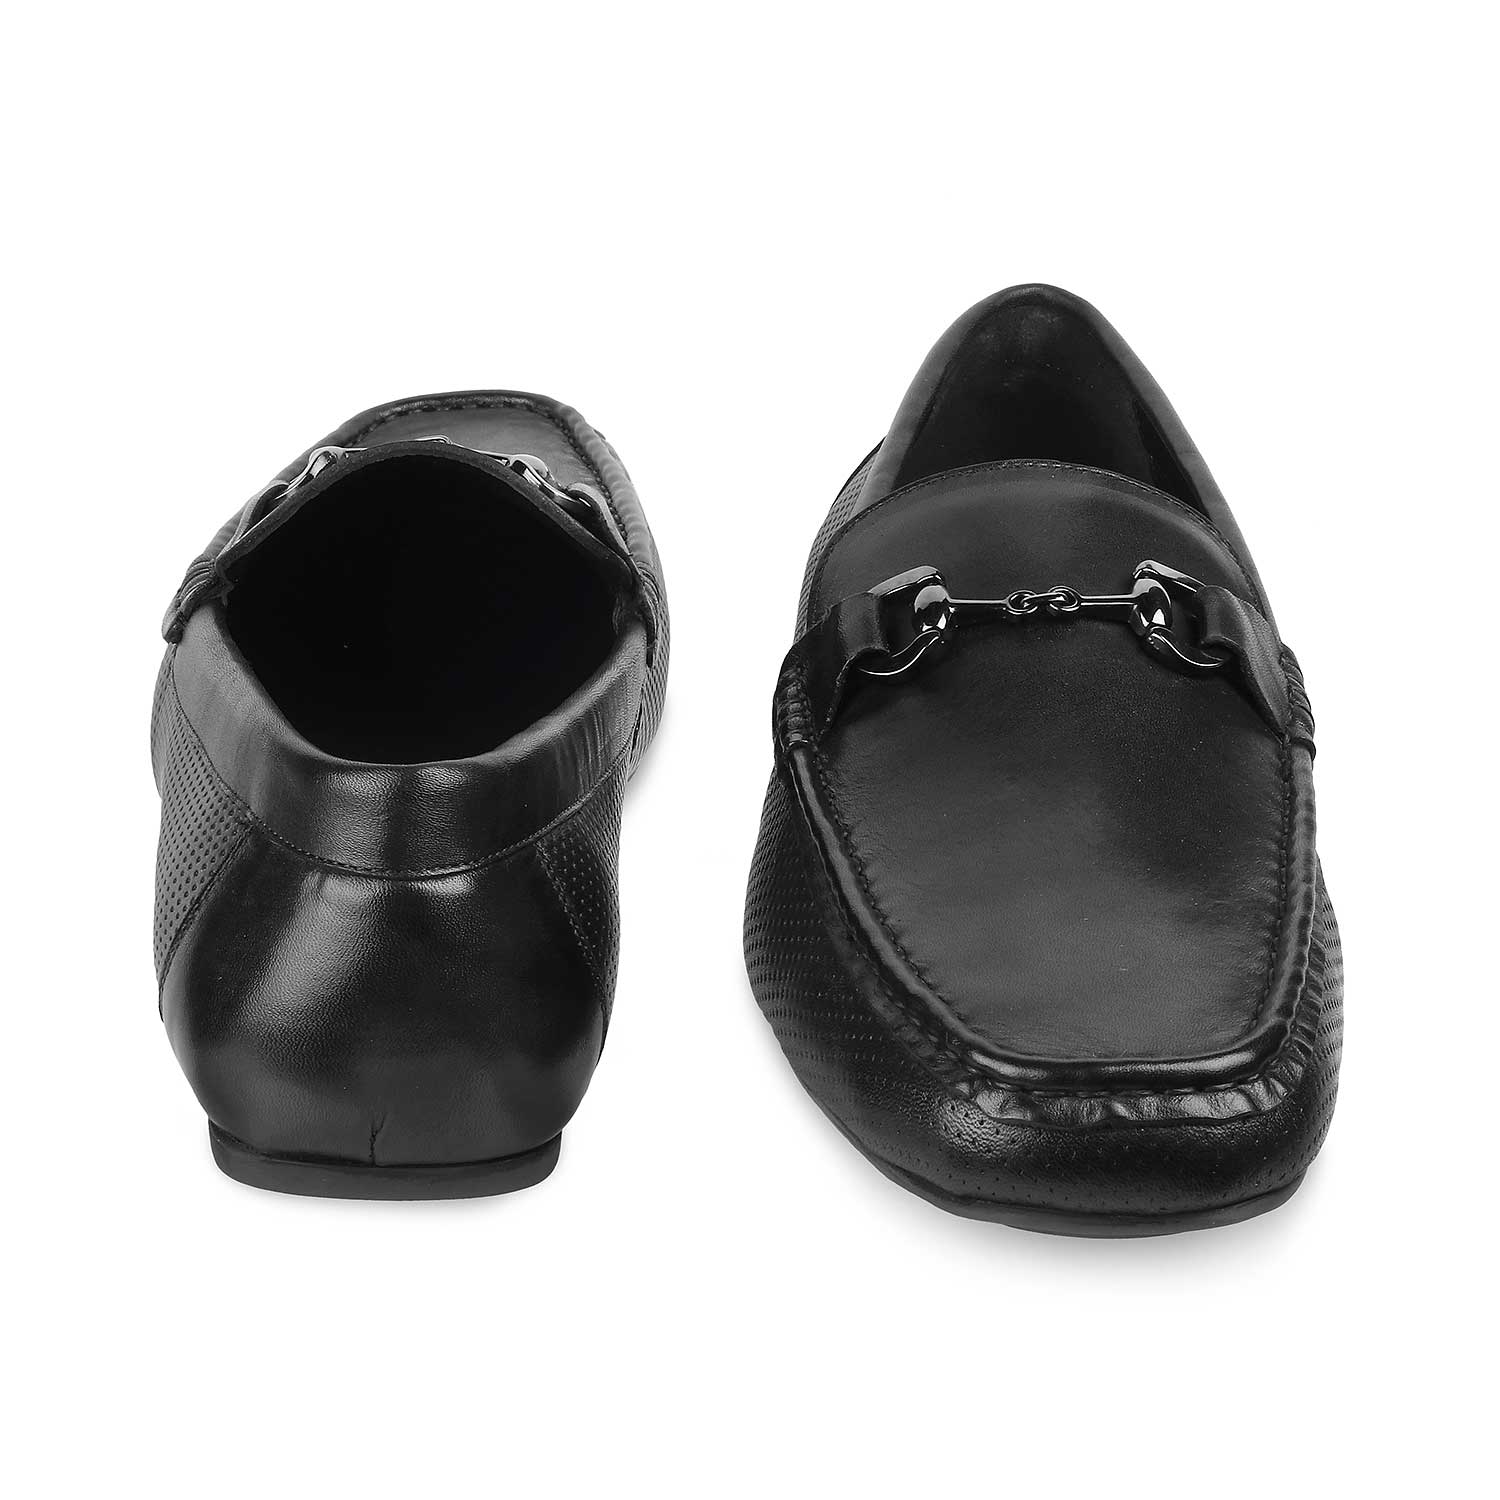 Tresmode-The Otter Black Men's Leather Driving Loafers Tresmode-Tresmode